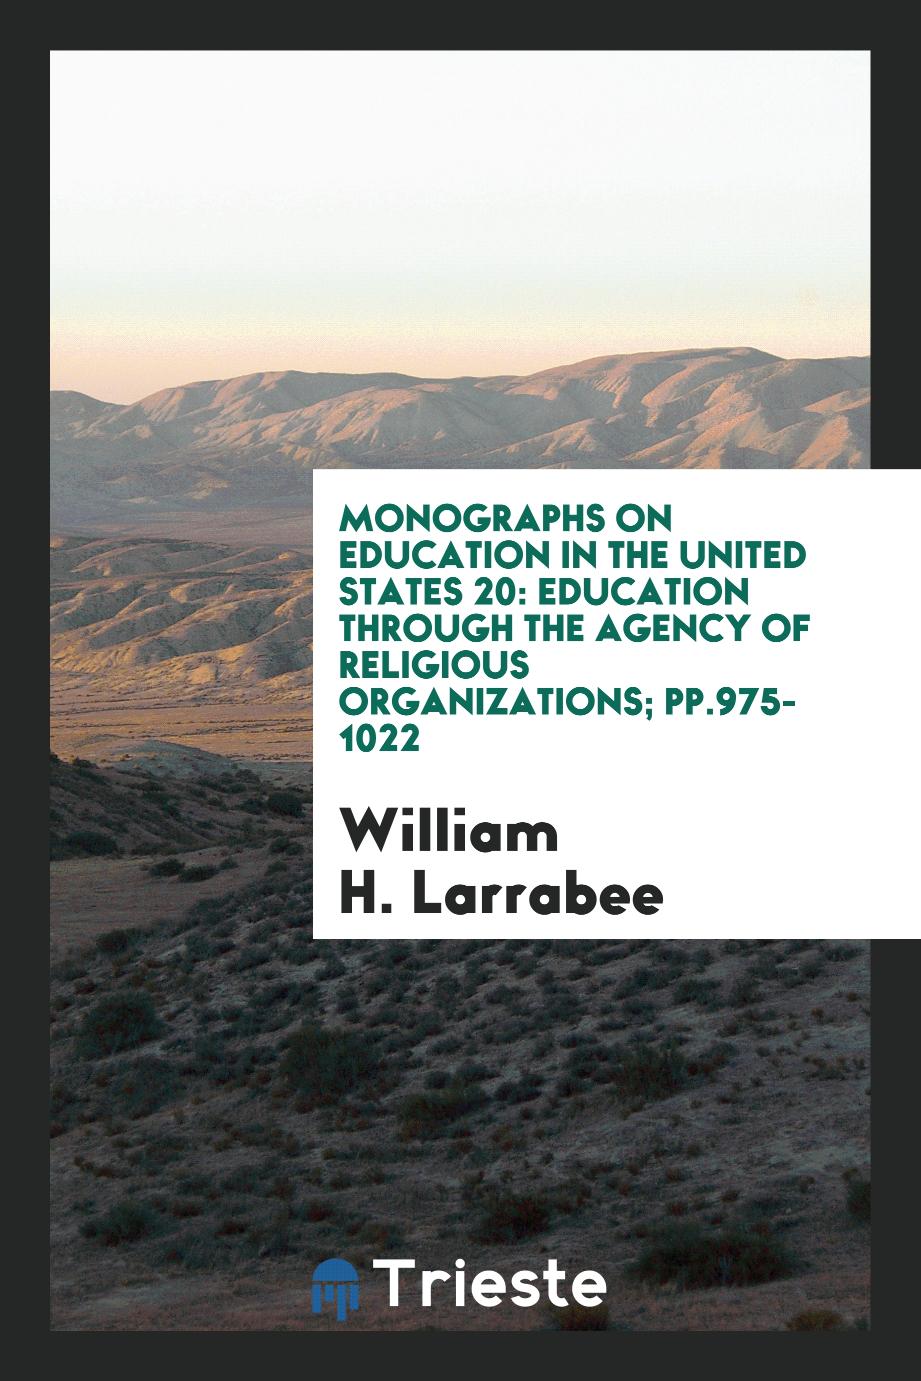 Monographs on education in the United states 20: Education Through the Agency of Religious Organizations; pp.975-1022